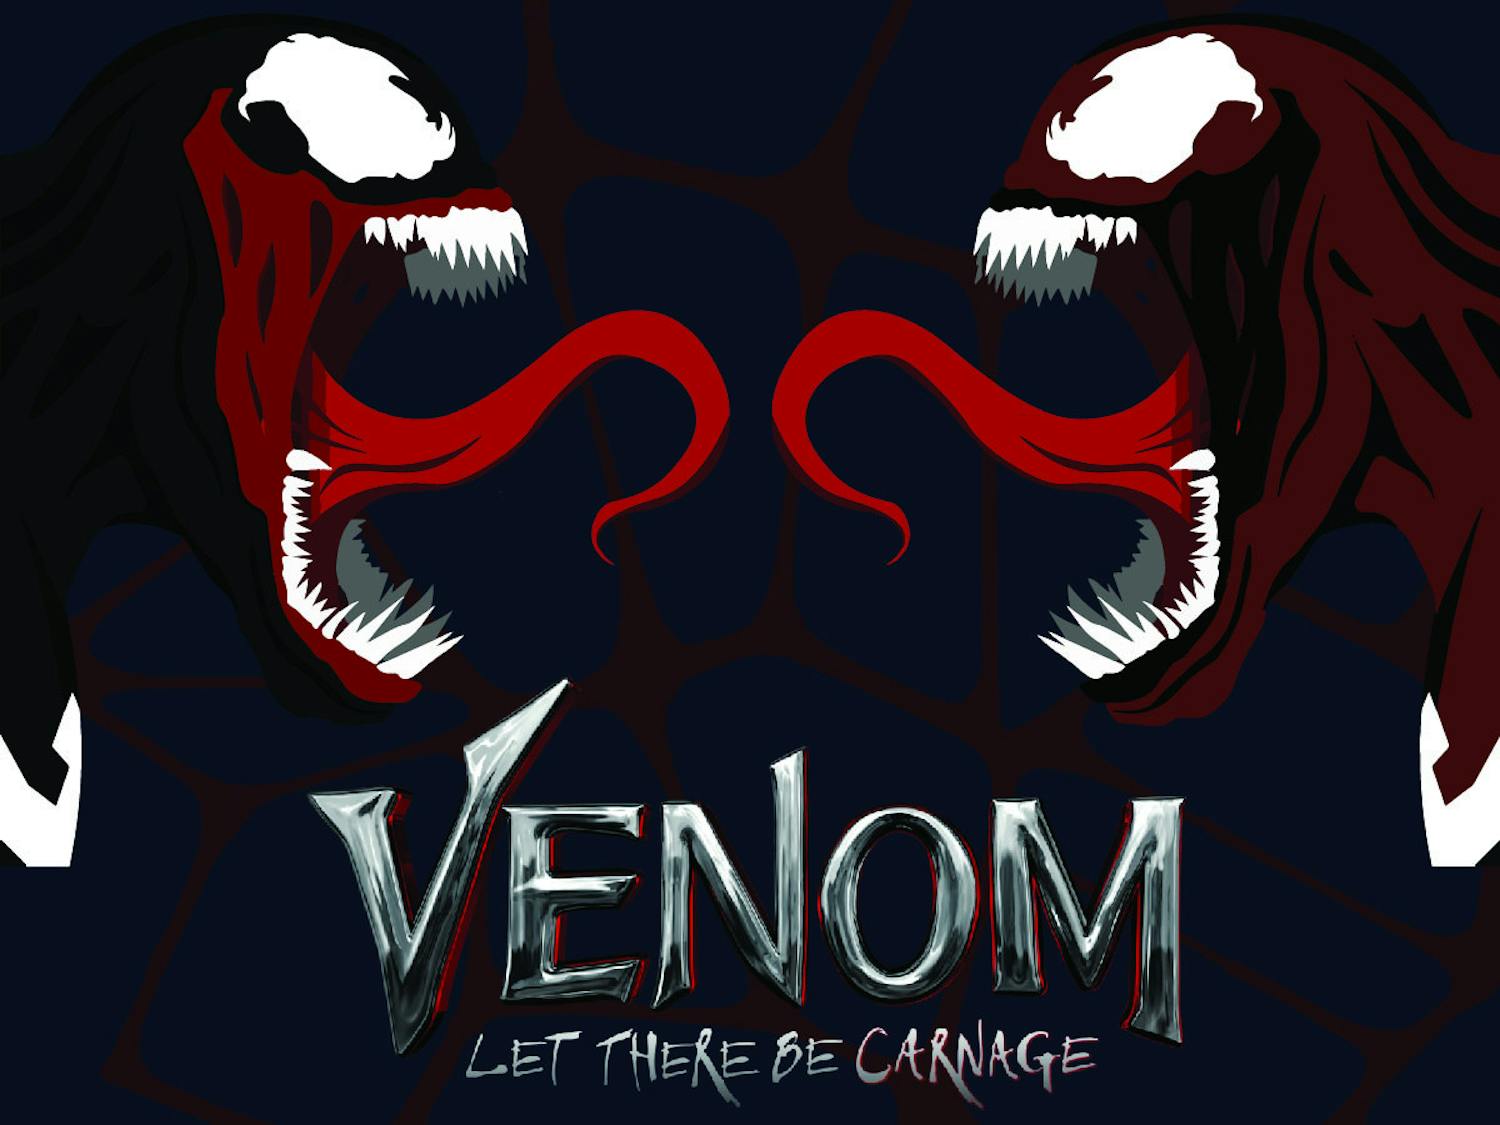 The second of the &quot;Venom&quot; movies, &quot;Venom: Let There Be Carnage,&quot; was released Oct. 1. 